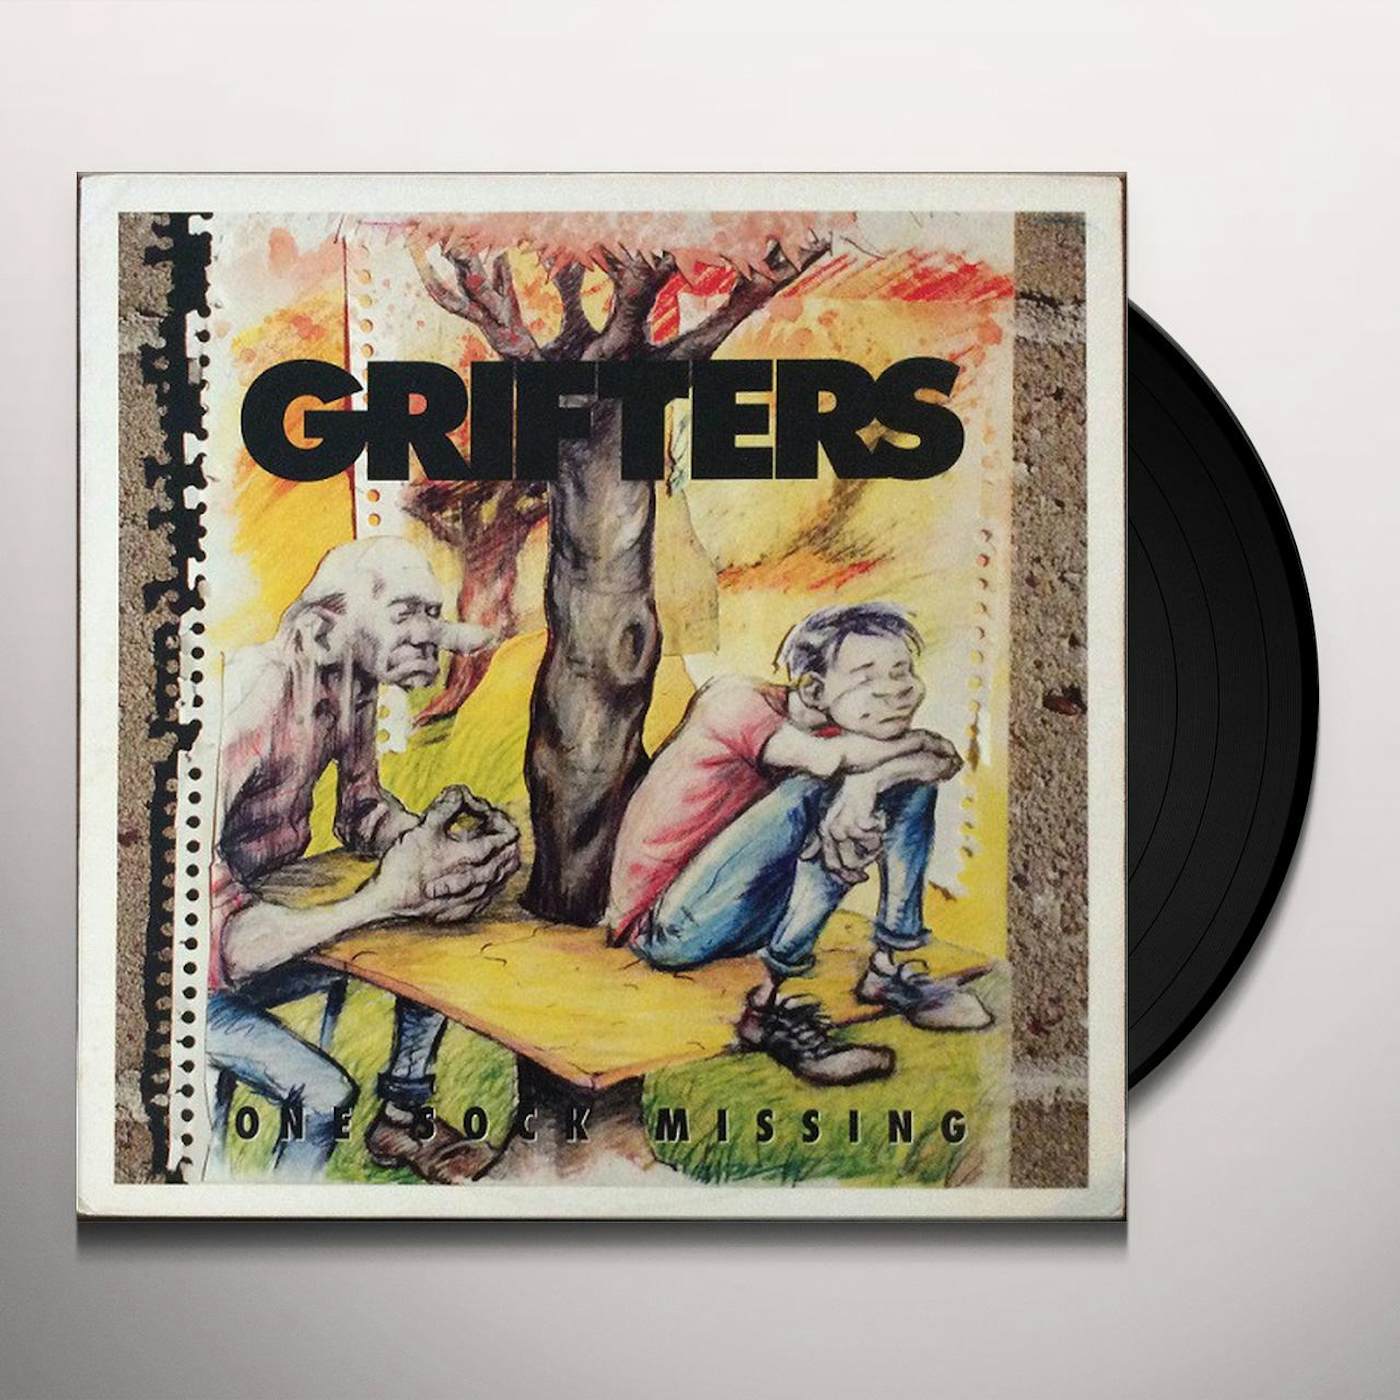 The Grifters One Sock Missing Vinyl Record